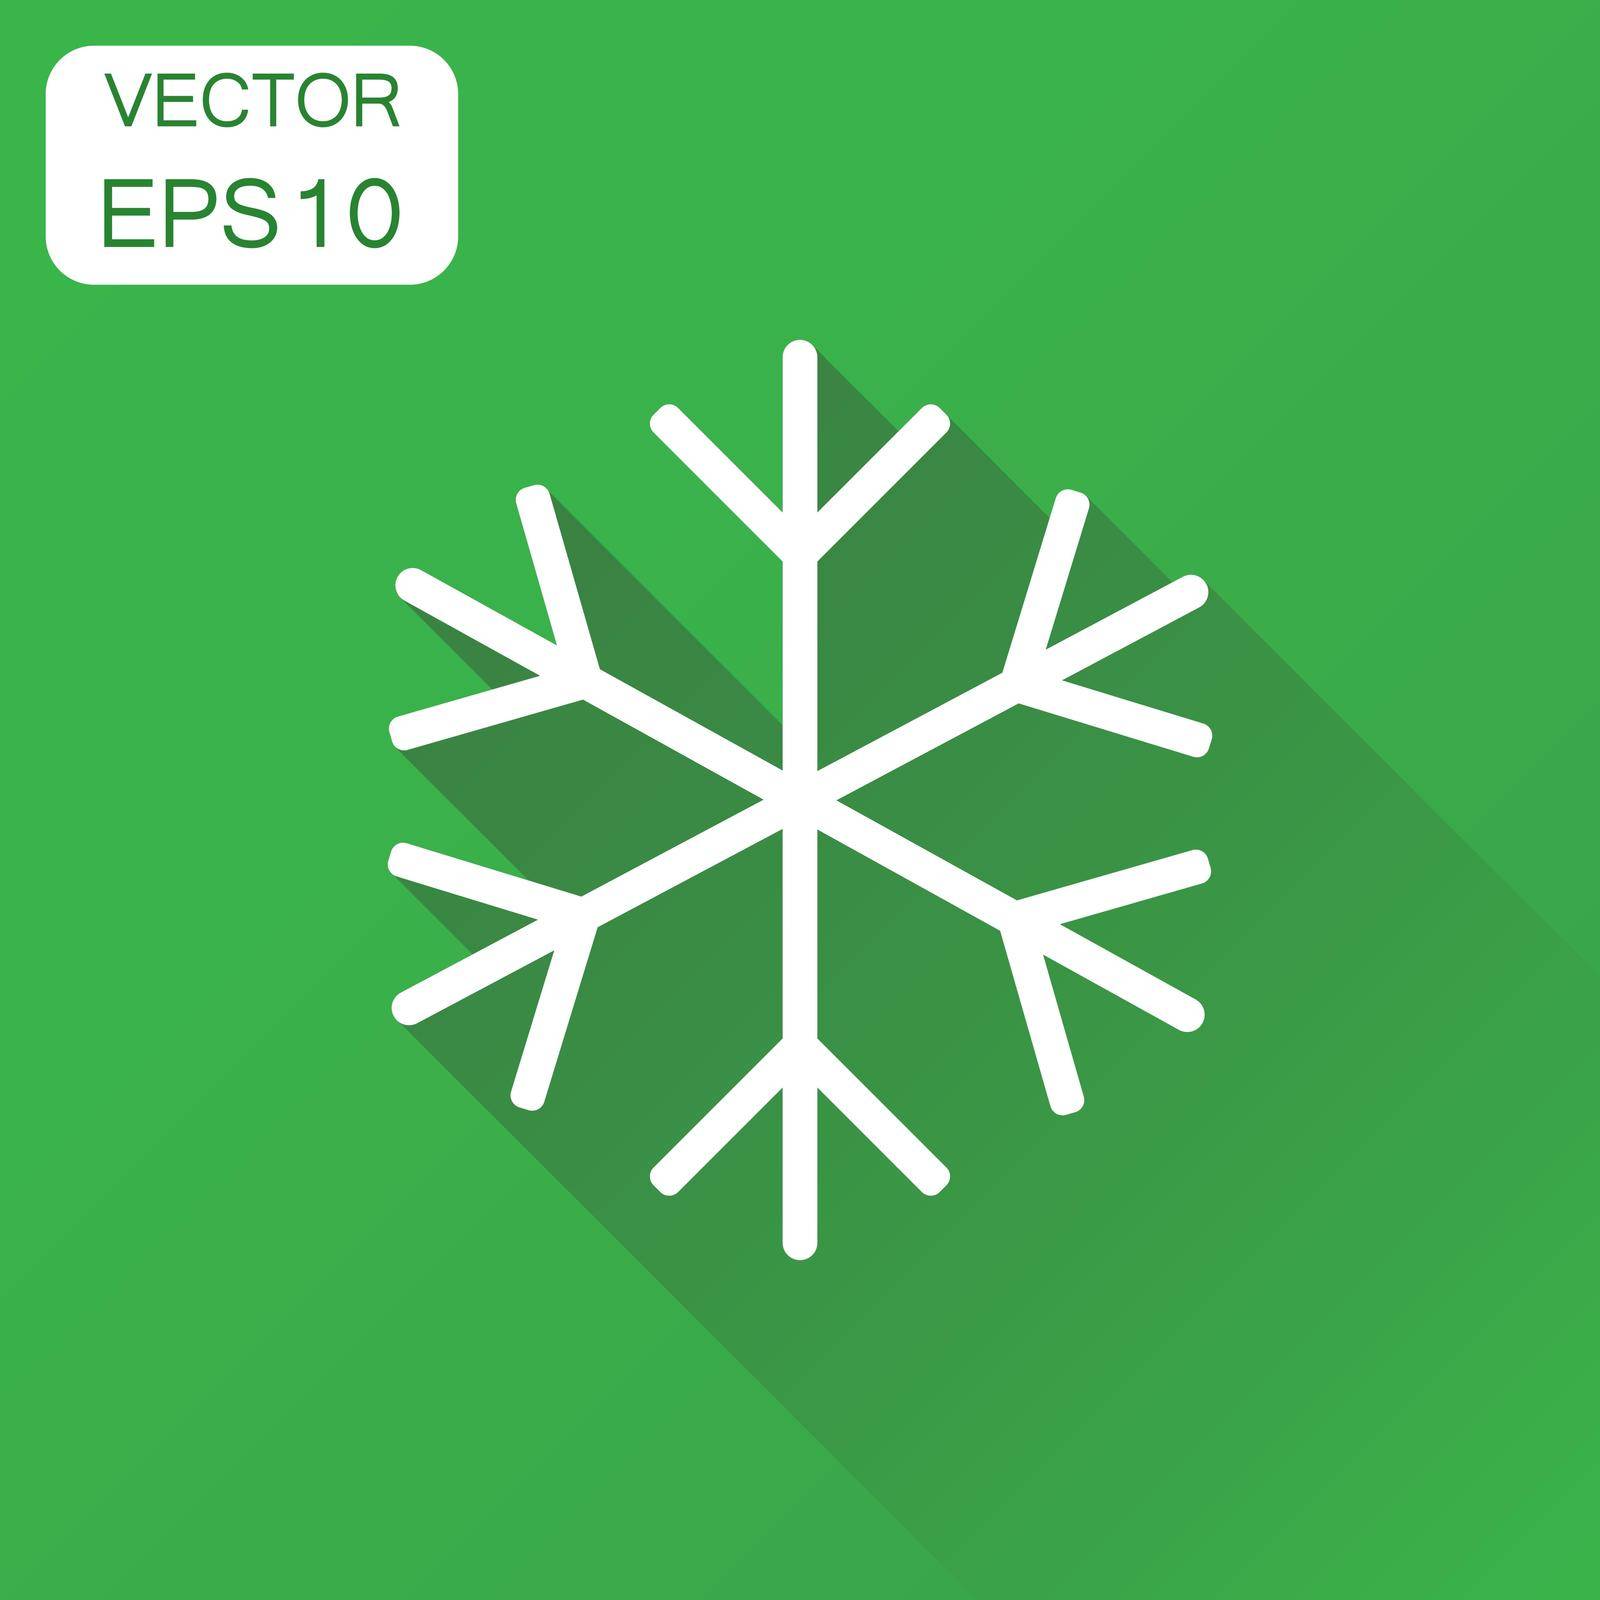 Snowflake icon. Business concept winter snowfall pictogram. Vector illustration on green background with long shadow. by LysenkoA